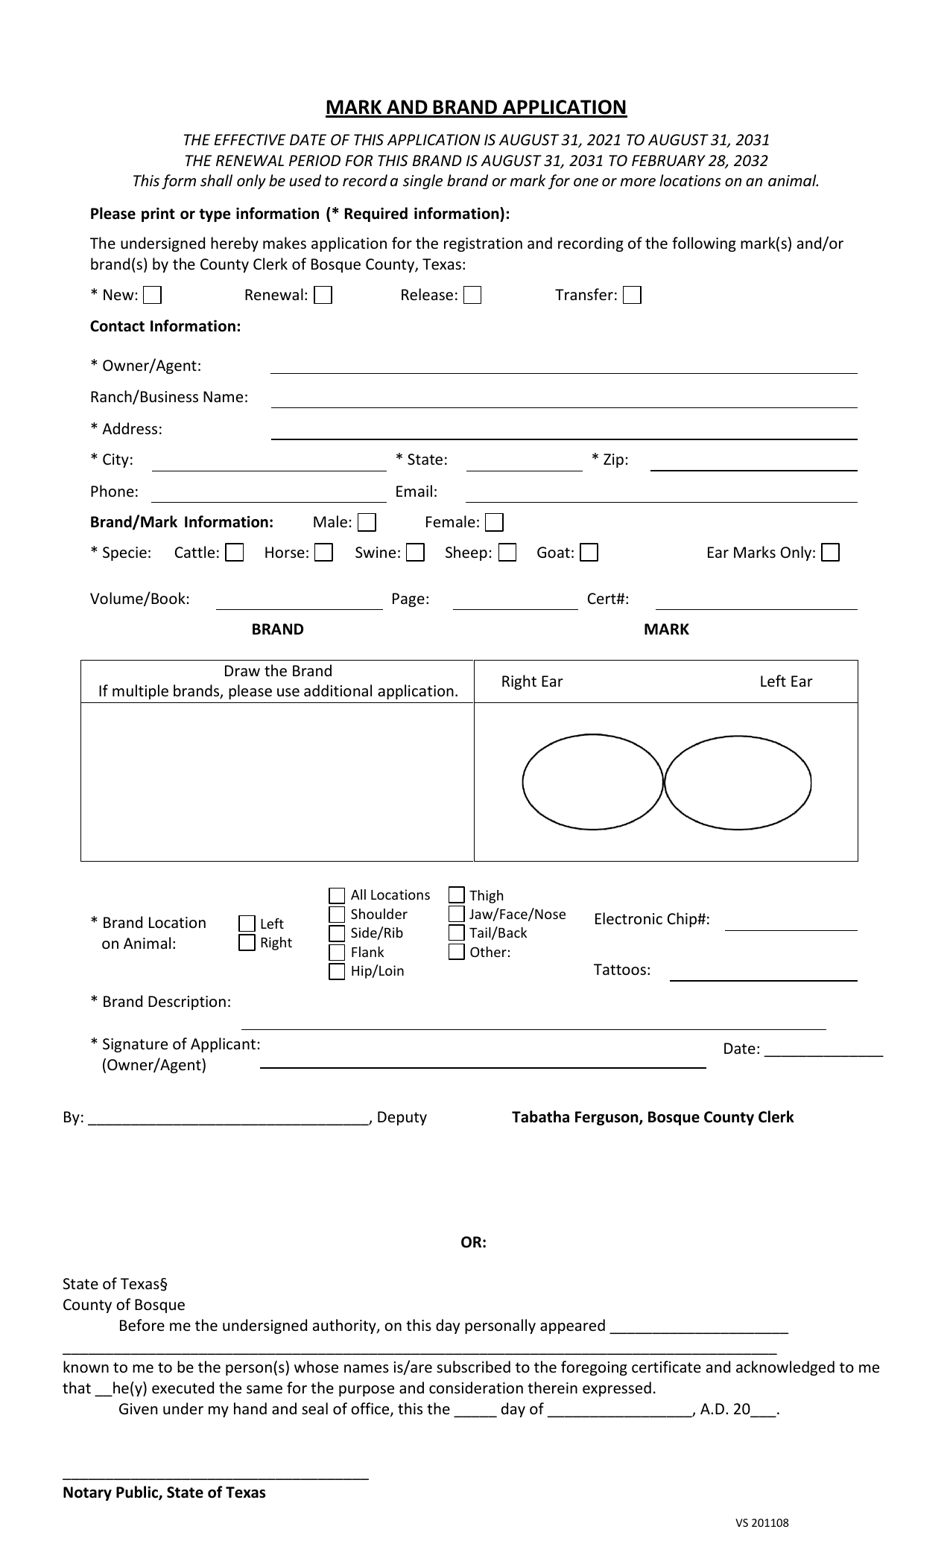 Mark and Brand Application - County of Bosque, Texas, Page 1